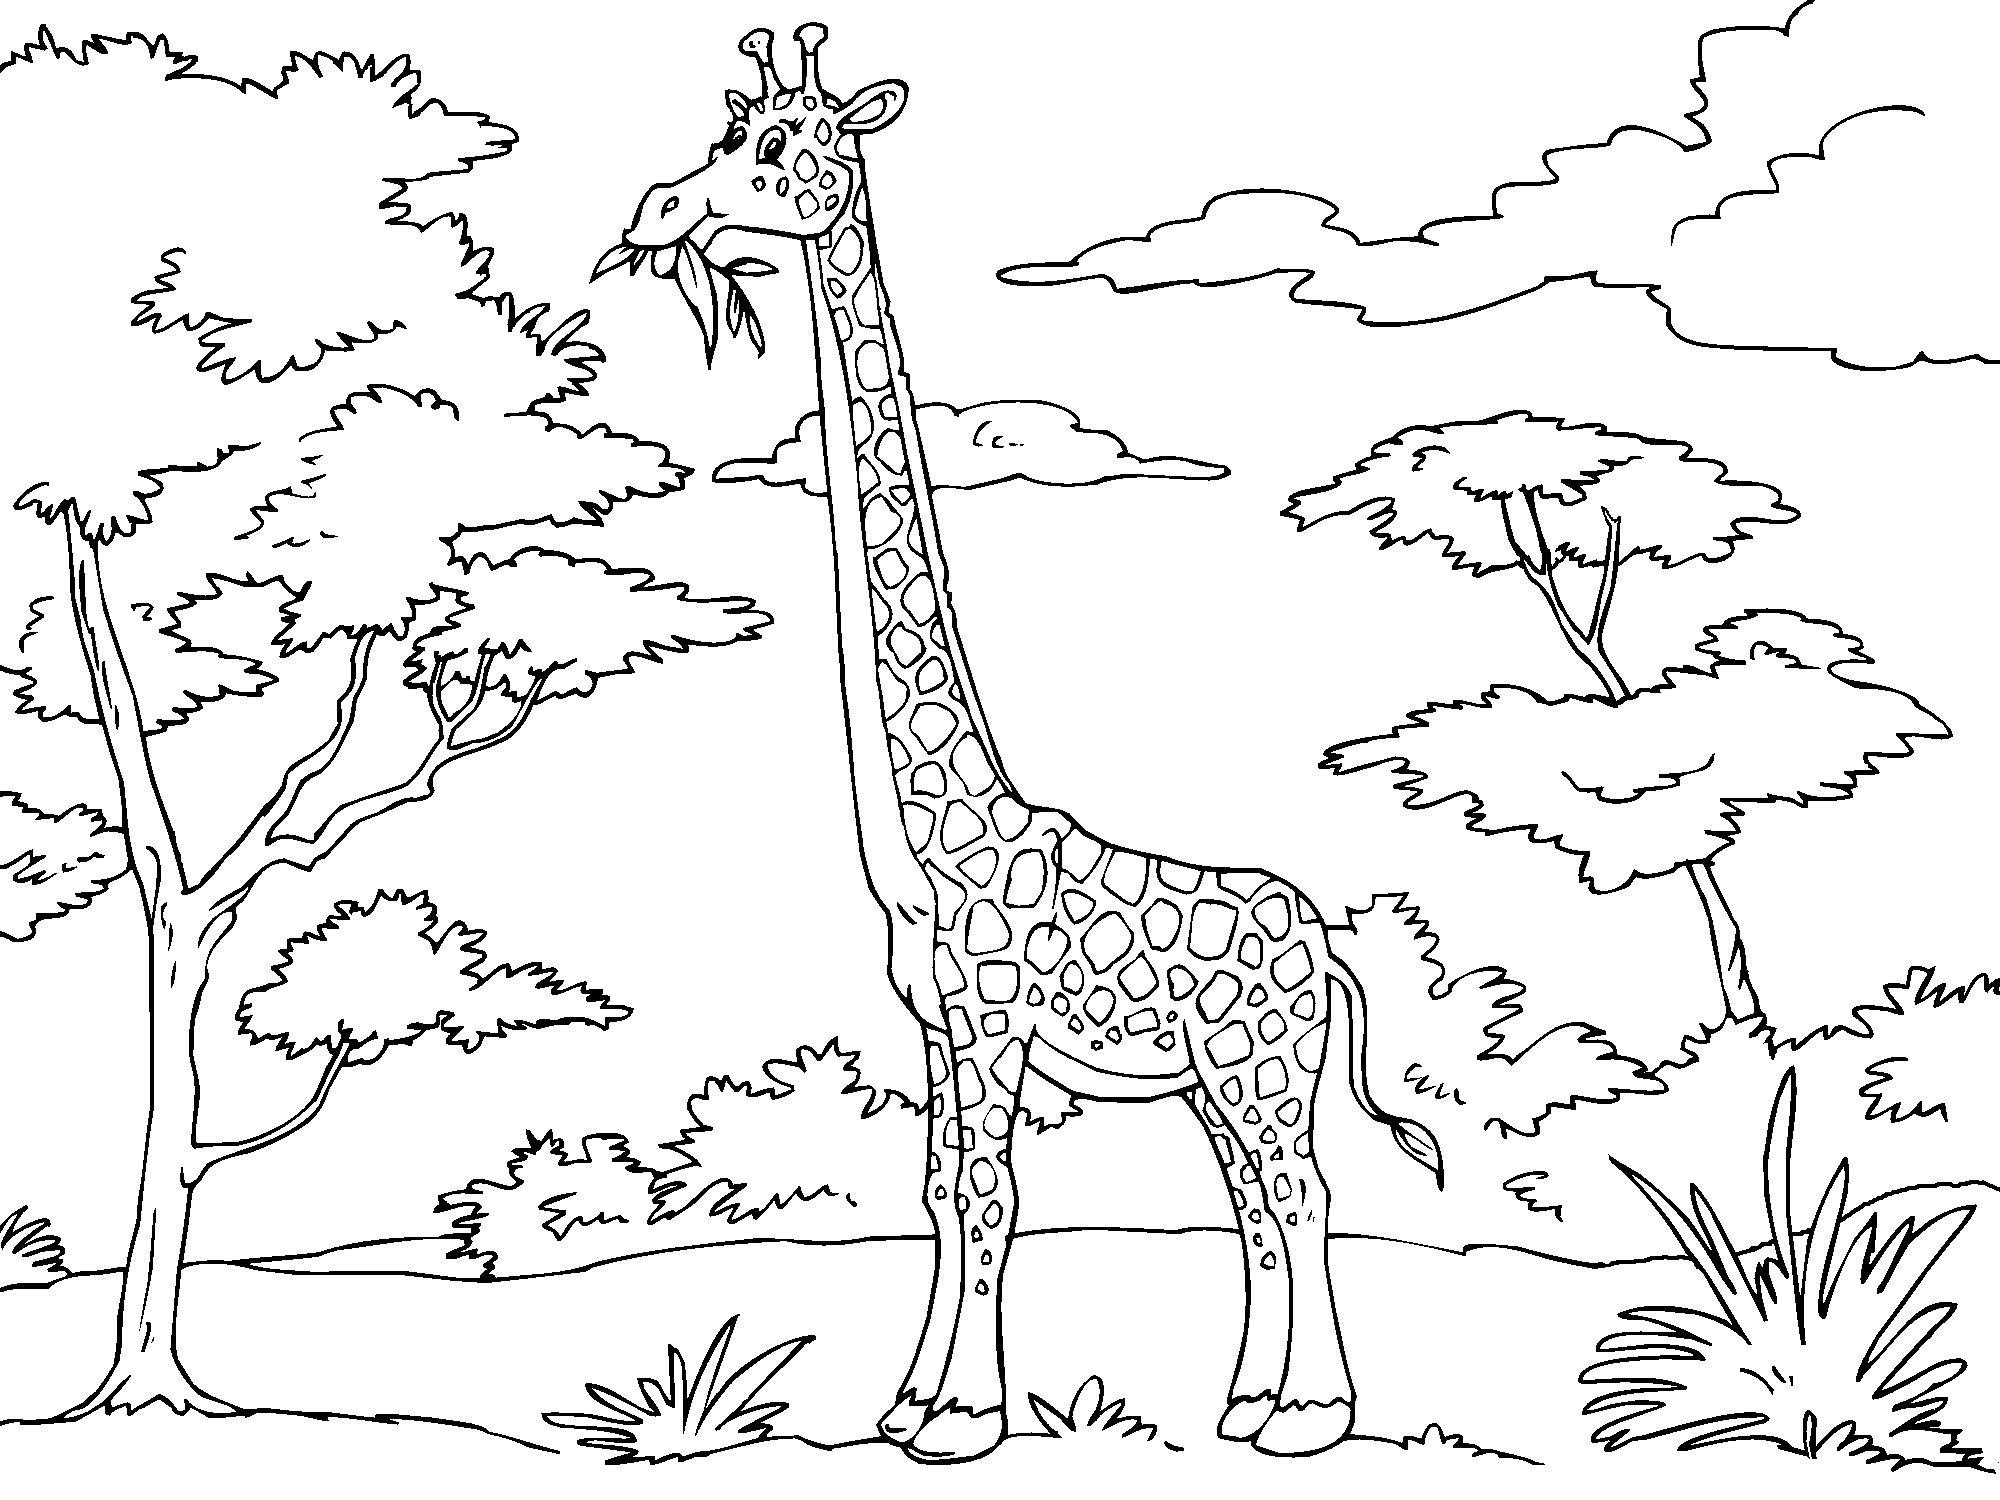 Giraffe Eating Coloring Page - Free Printable Coloring Pages for Kids